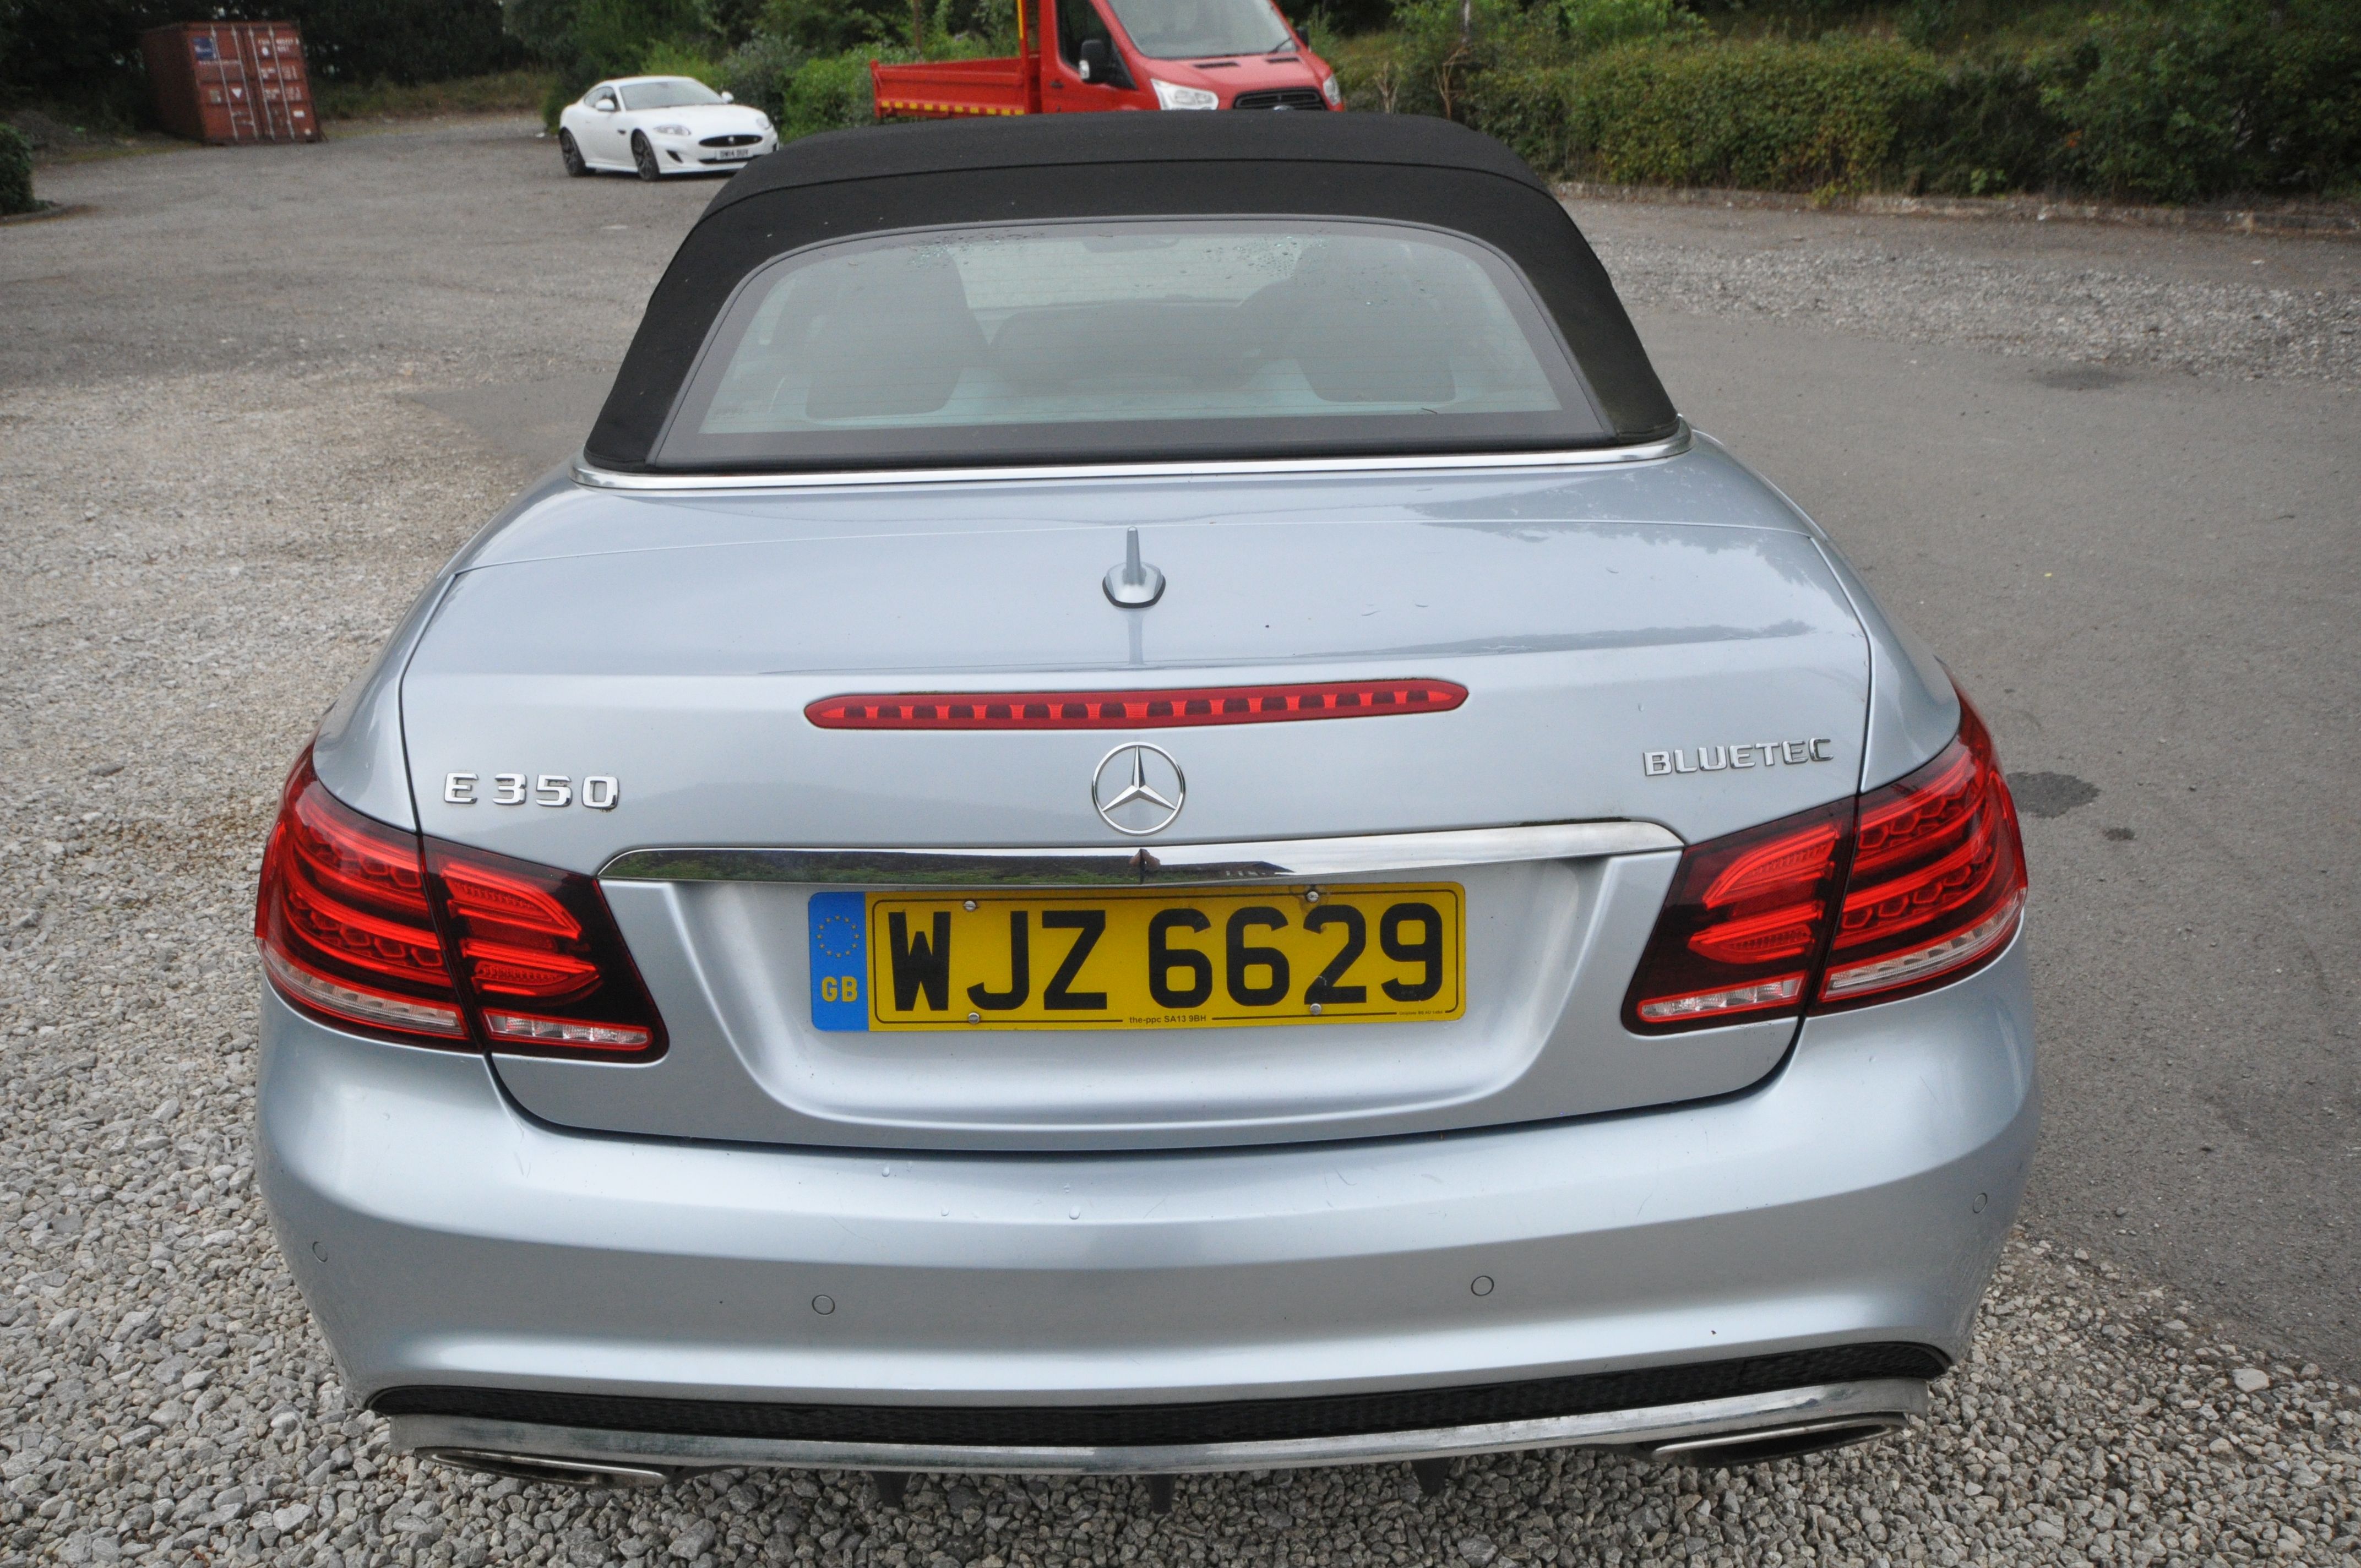 A 2014 Mercedes E350 AMG SPORT BLUETEC CABRIOLET - WJZ 6629 - This vehicle was first registered in - Image 4 of 13